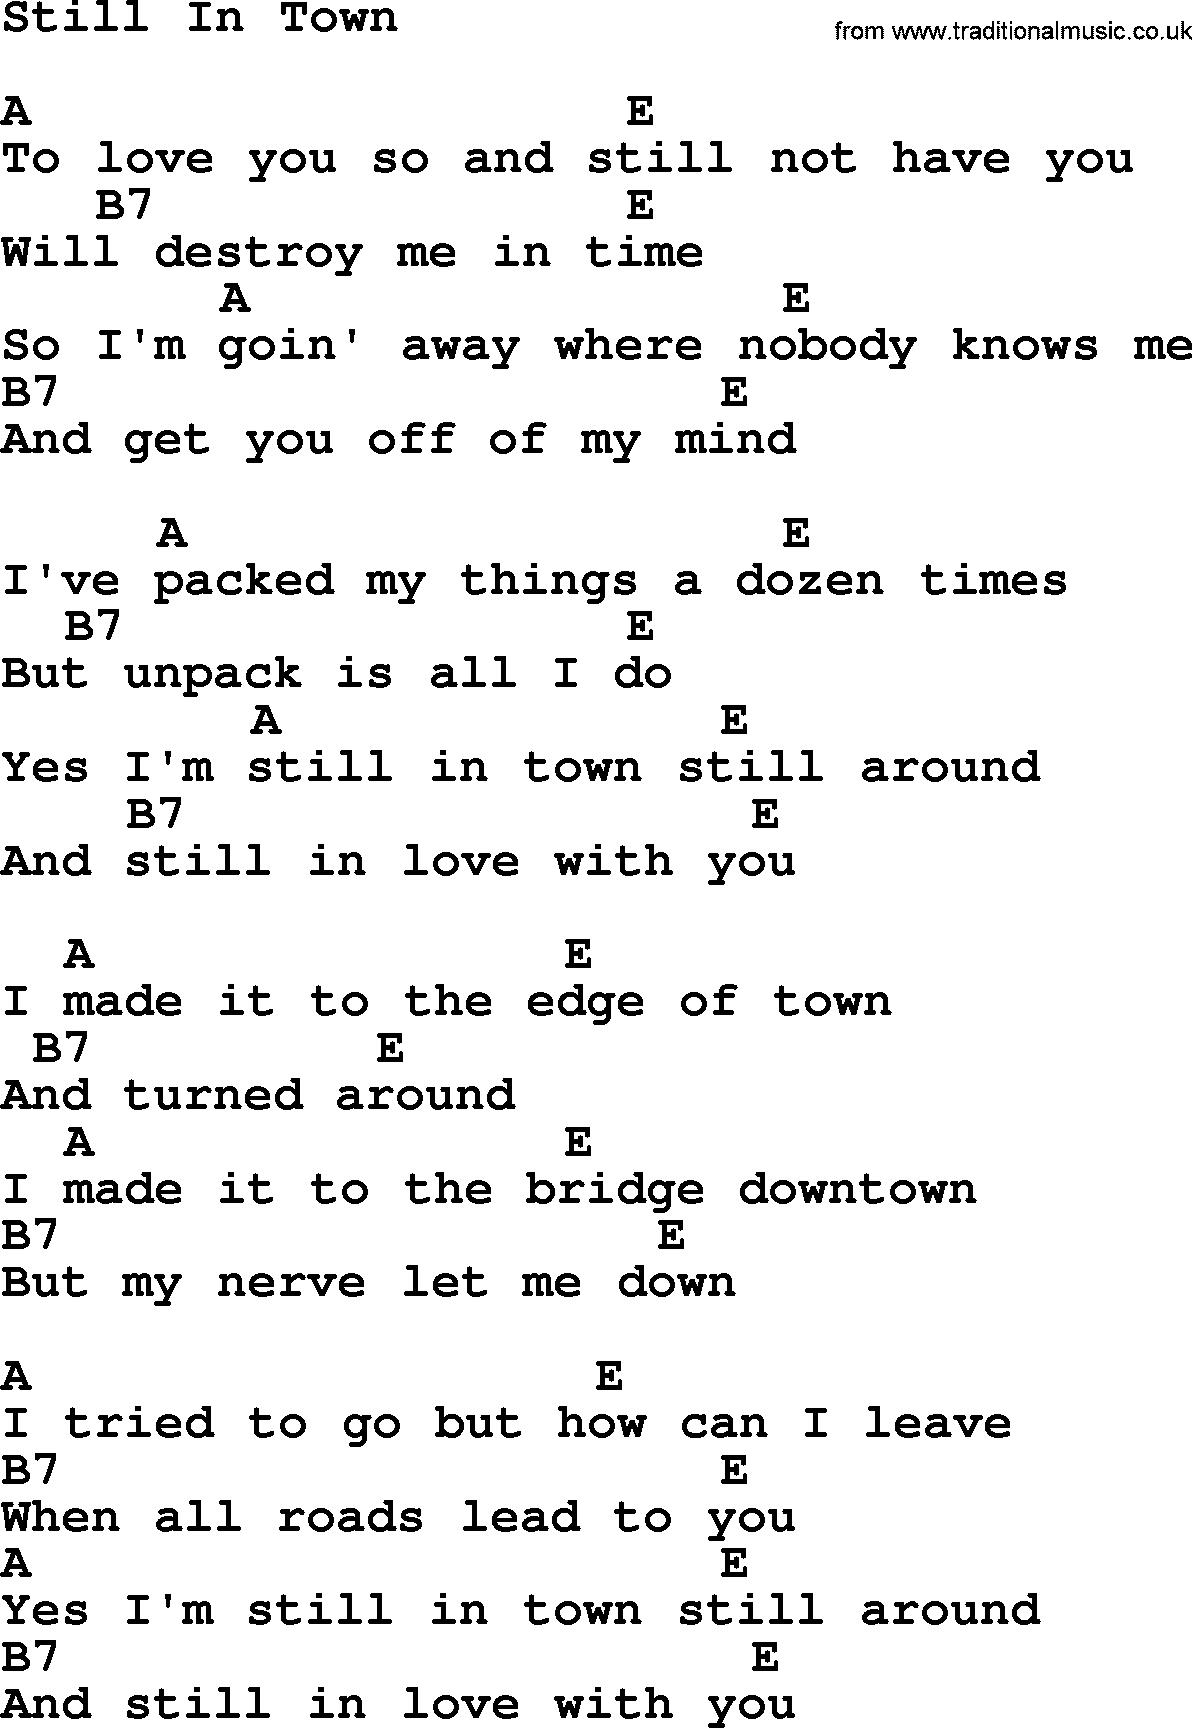 Johnny Cash song Still In Town, lyrics and chords